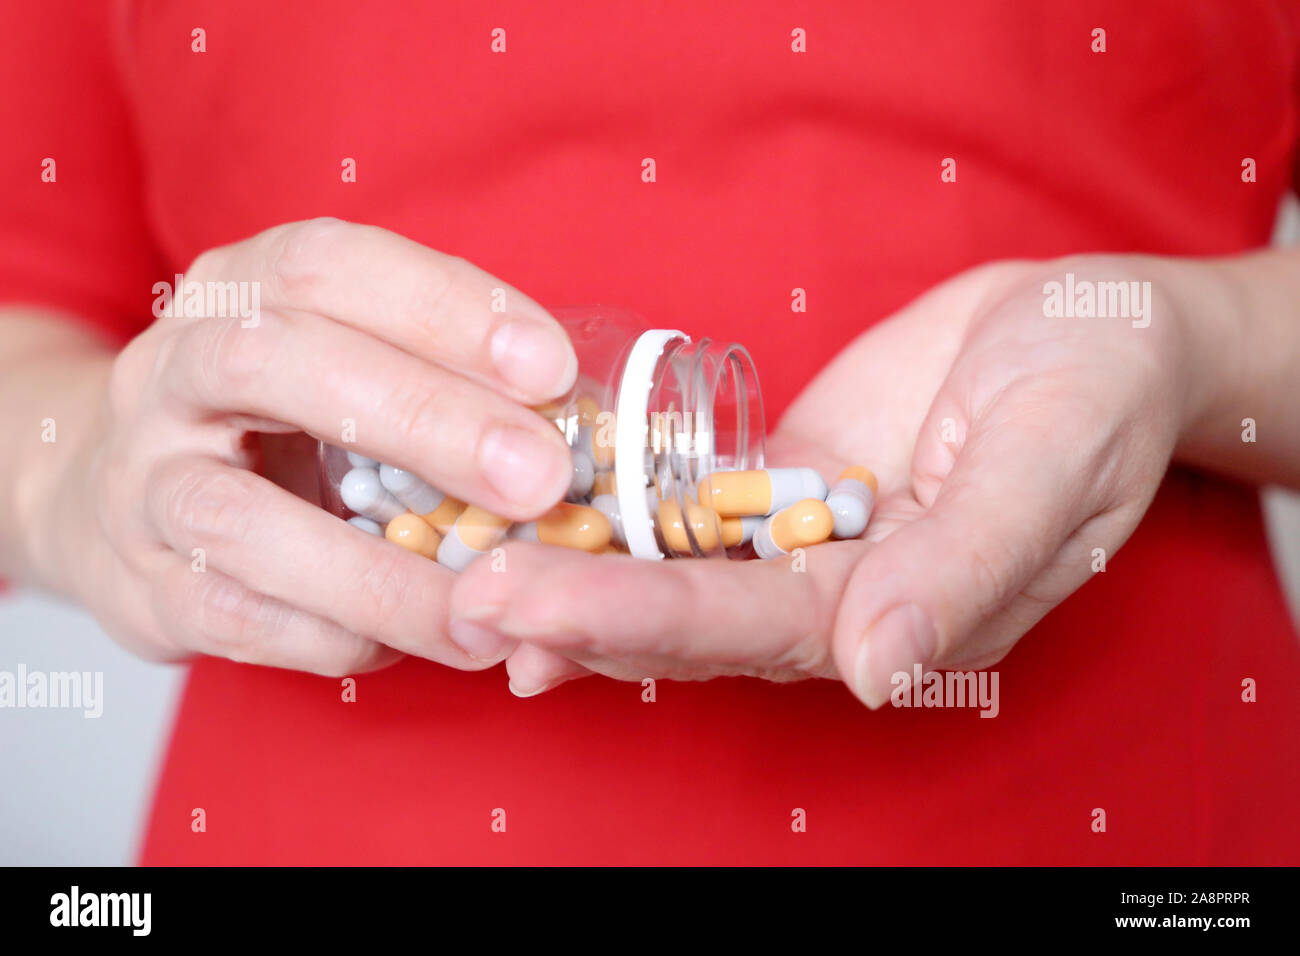 Pills in female hands, woman in red dress holding bottle of medical capsules. Concept of vitamins for beauty, skin care, taking medication,  diet pill Stock Photo